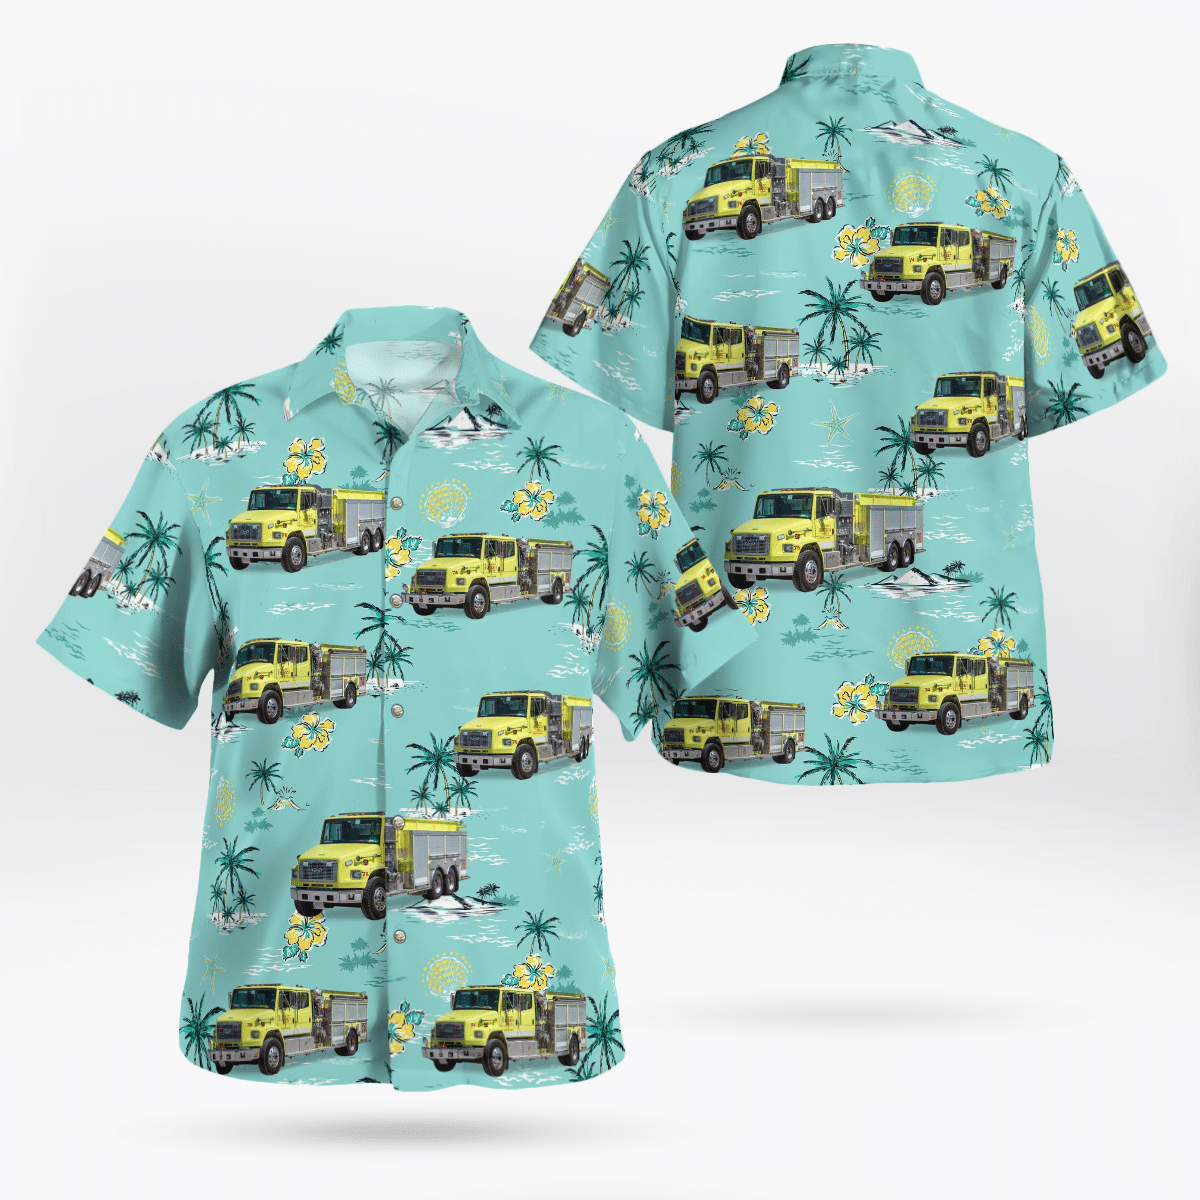 If you want to be noticed, wear These Trendy Hawaiian Shirt 128